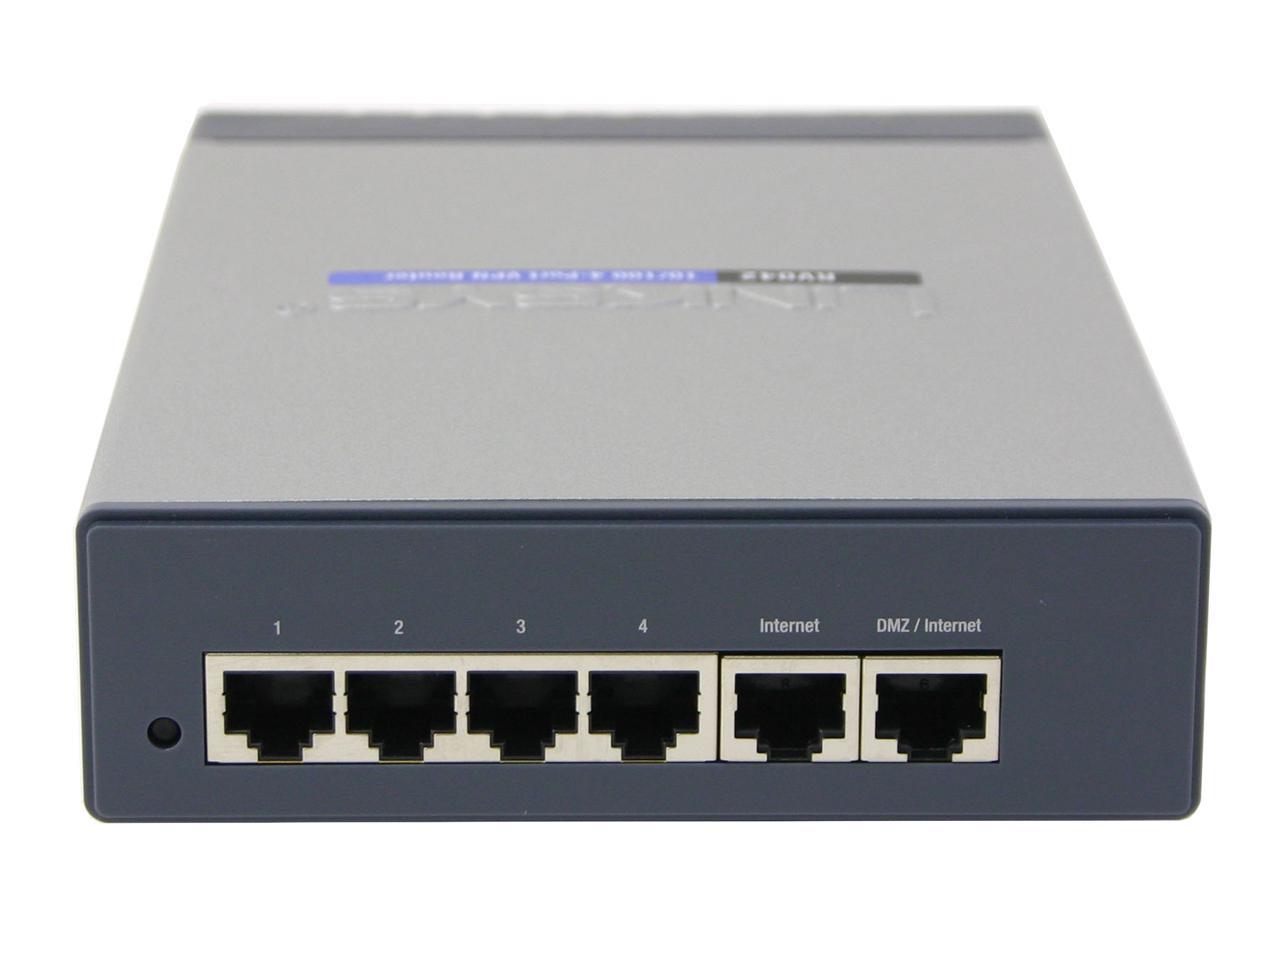 Cisco Small Business RV042 10/100Mbps VPN Router 745883560530 | eBay